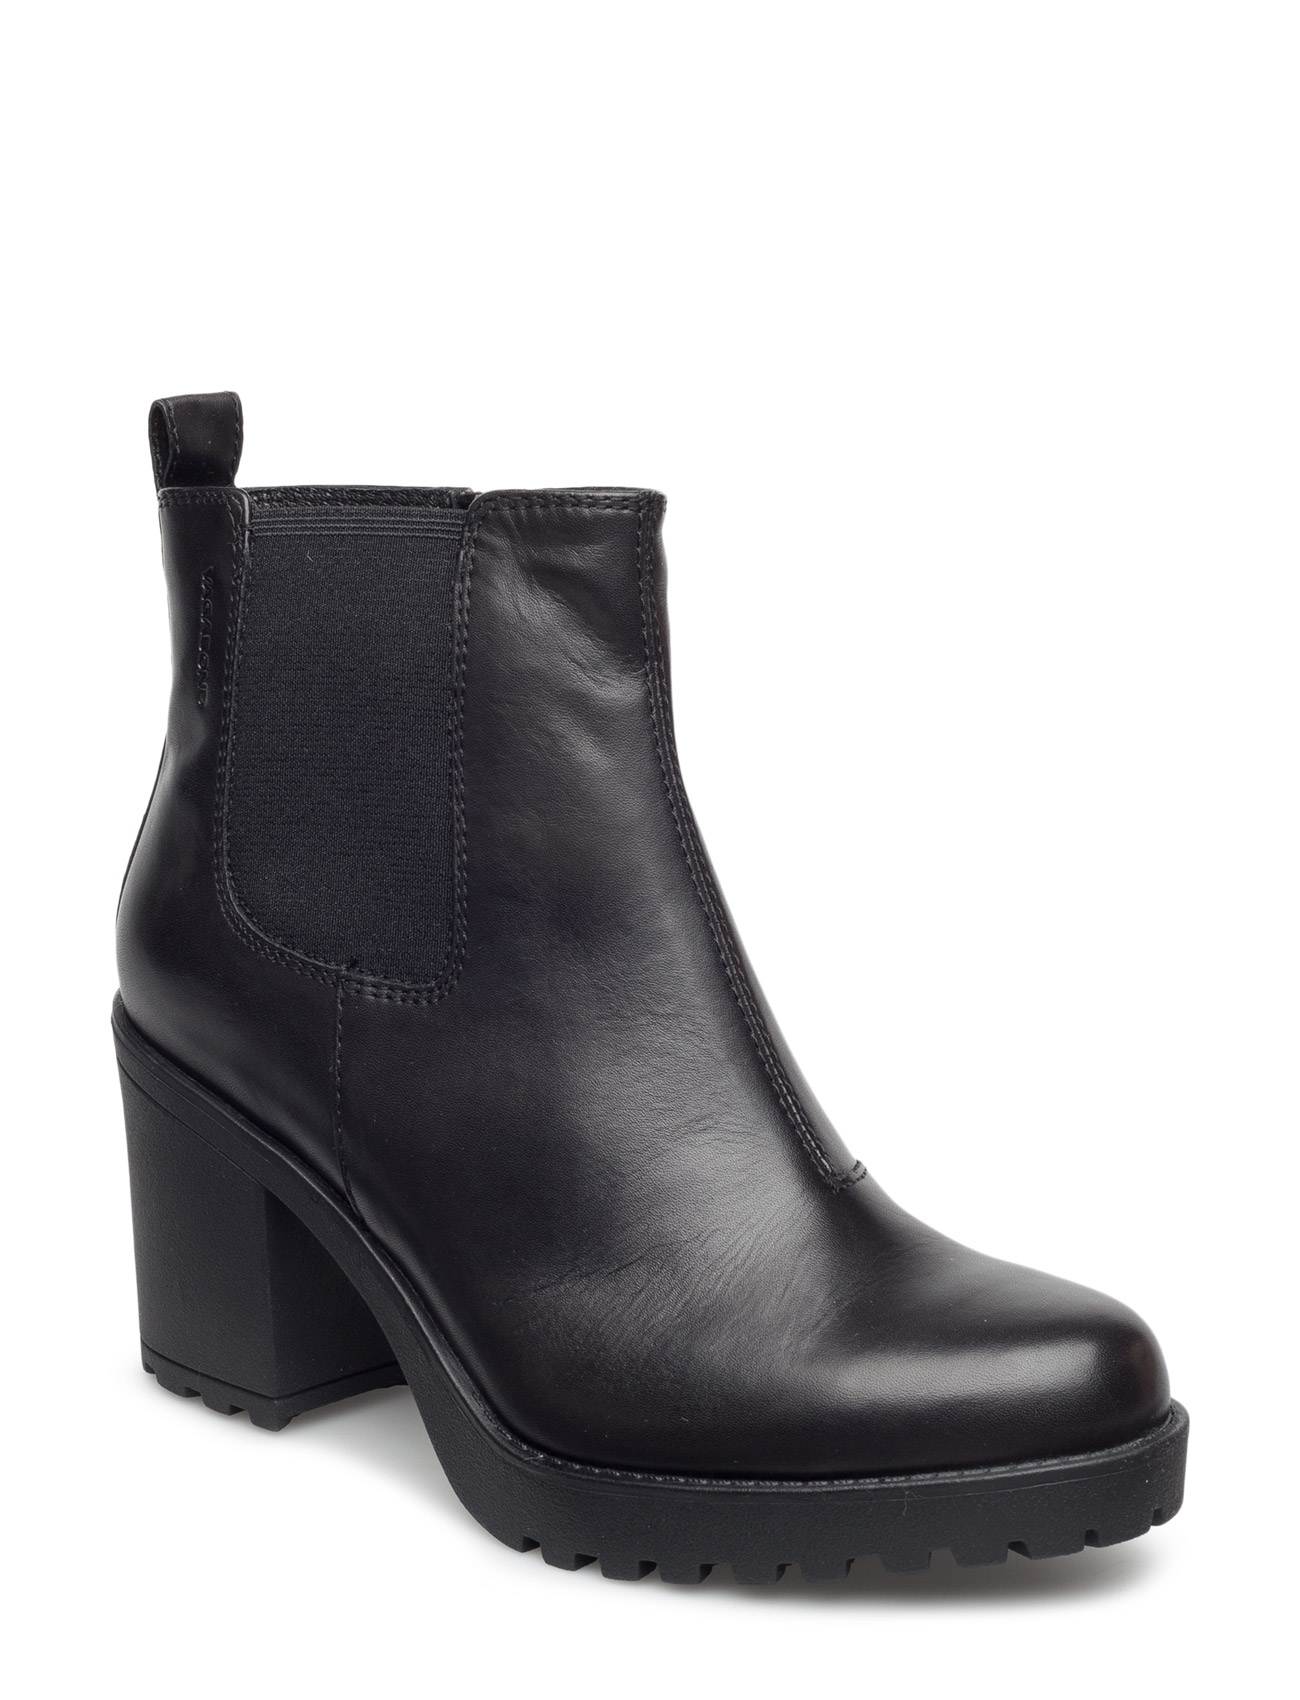 Grace - Heeled ankle boots Boozt.com